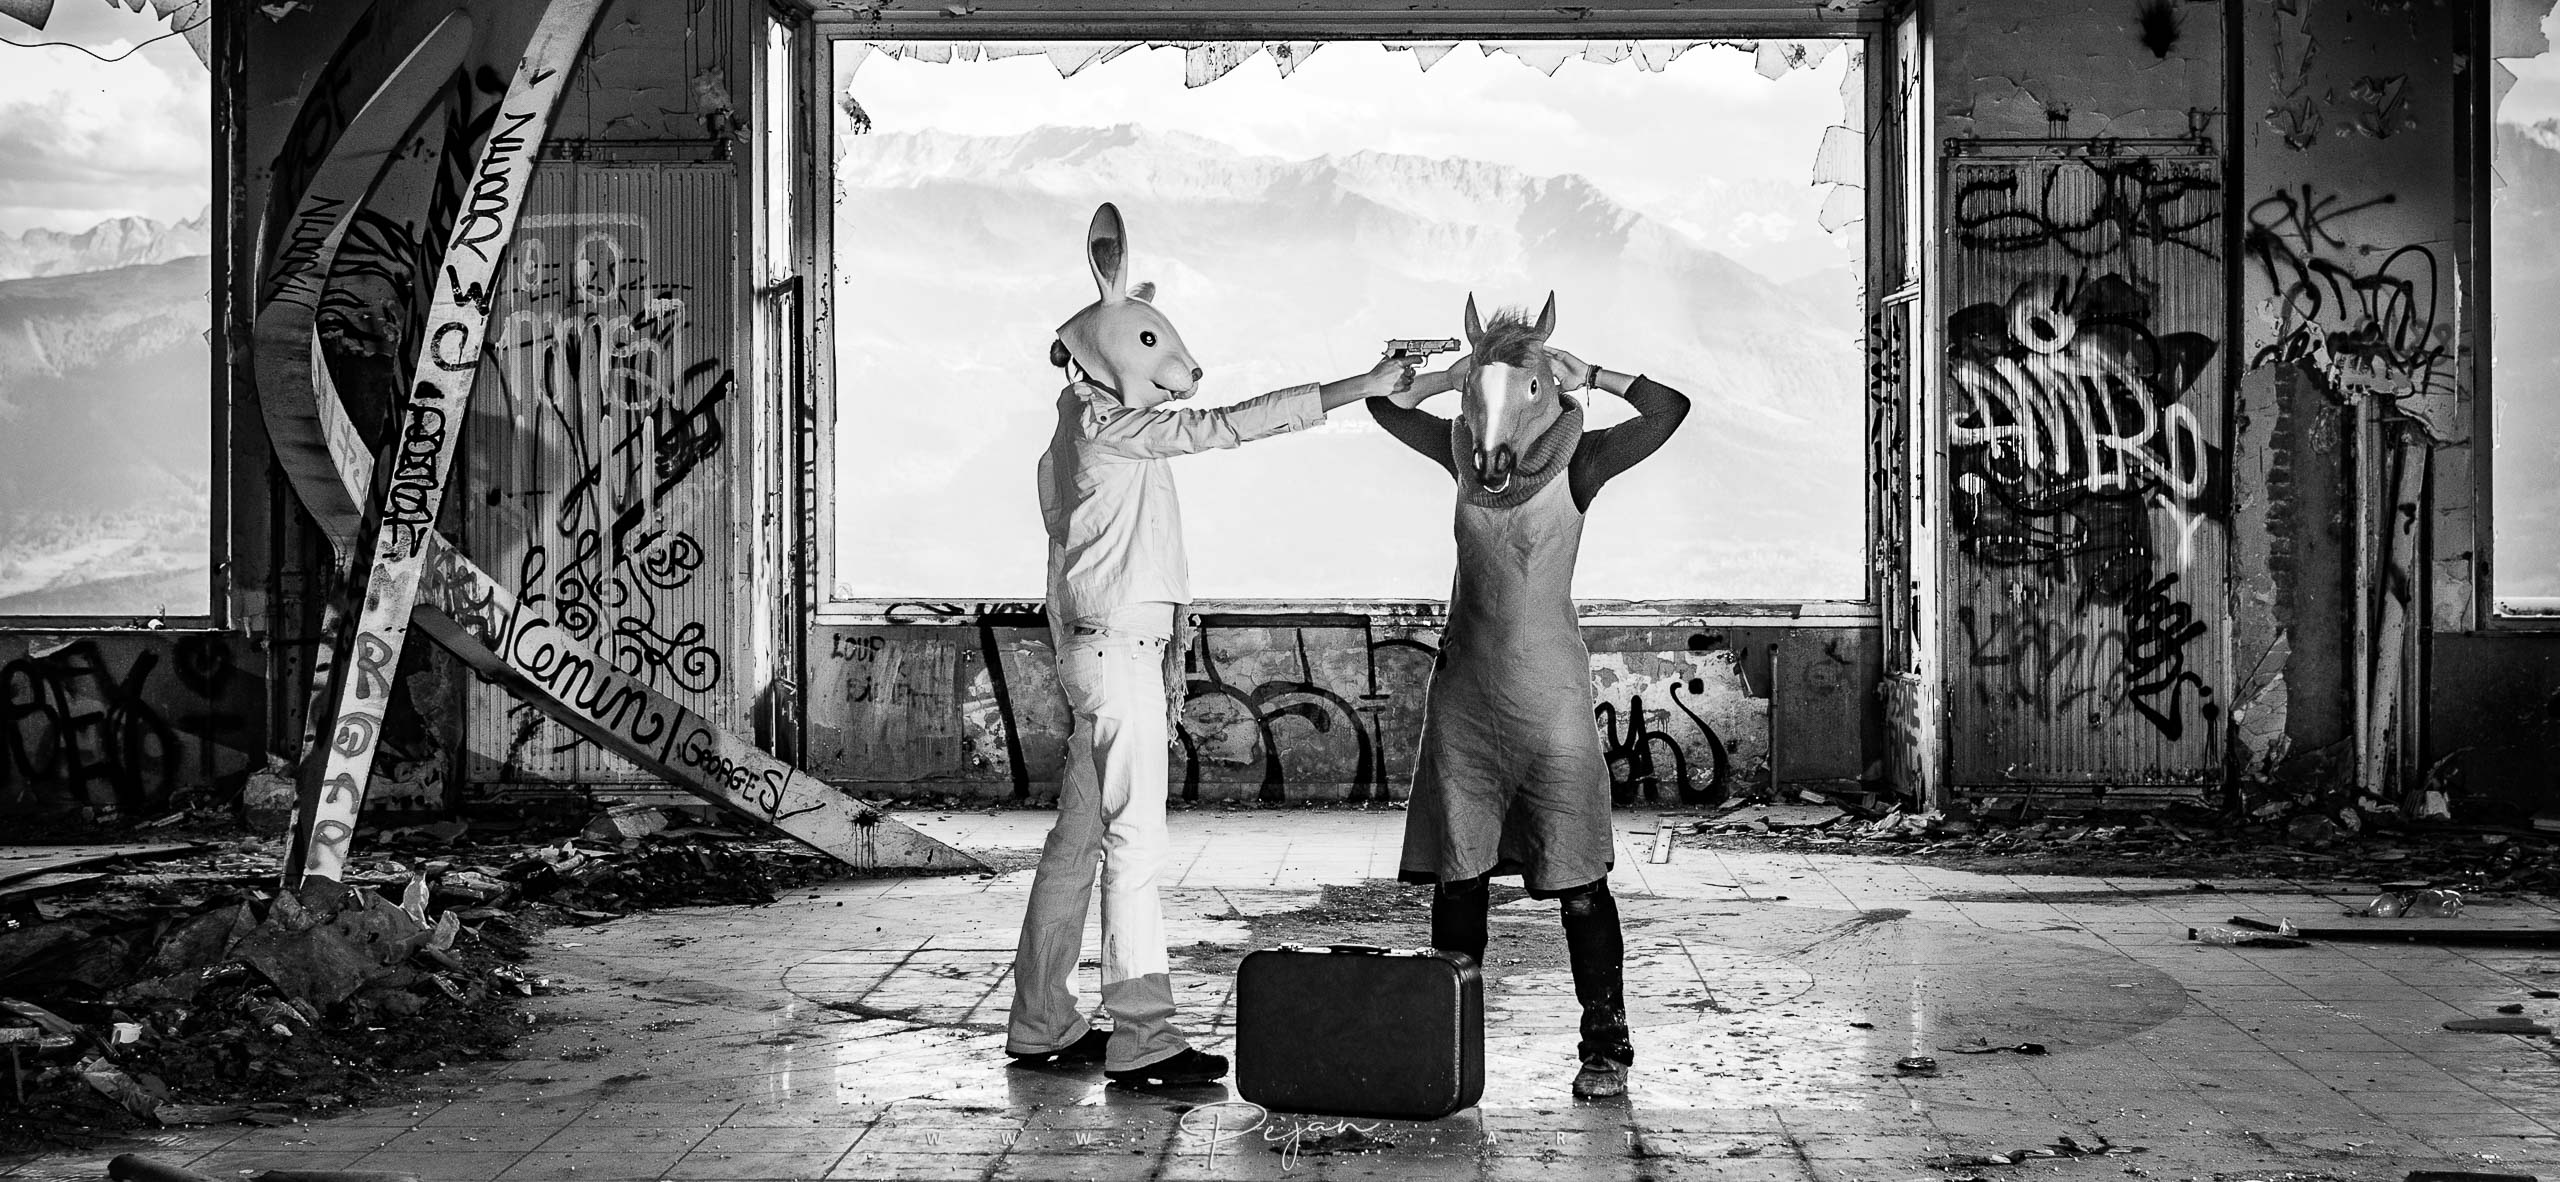 Black and white urbex photography - Staged heist with animal masks. A rabbit holds a gun to a horse's head in a dilapidated building.